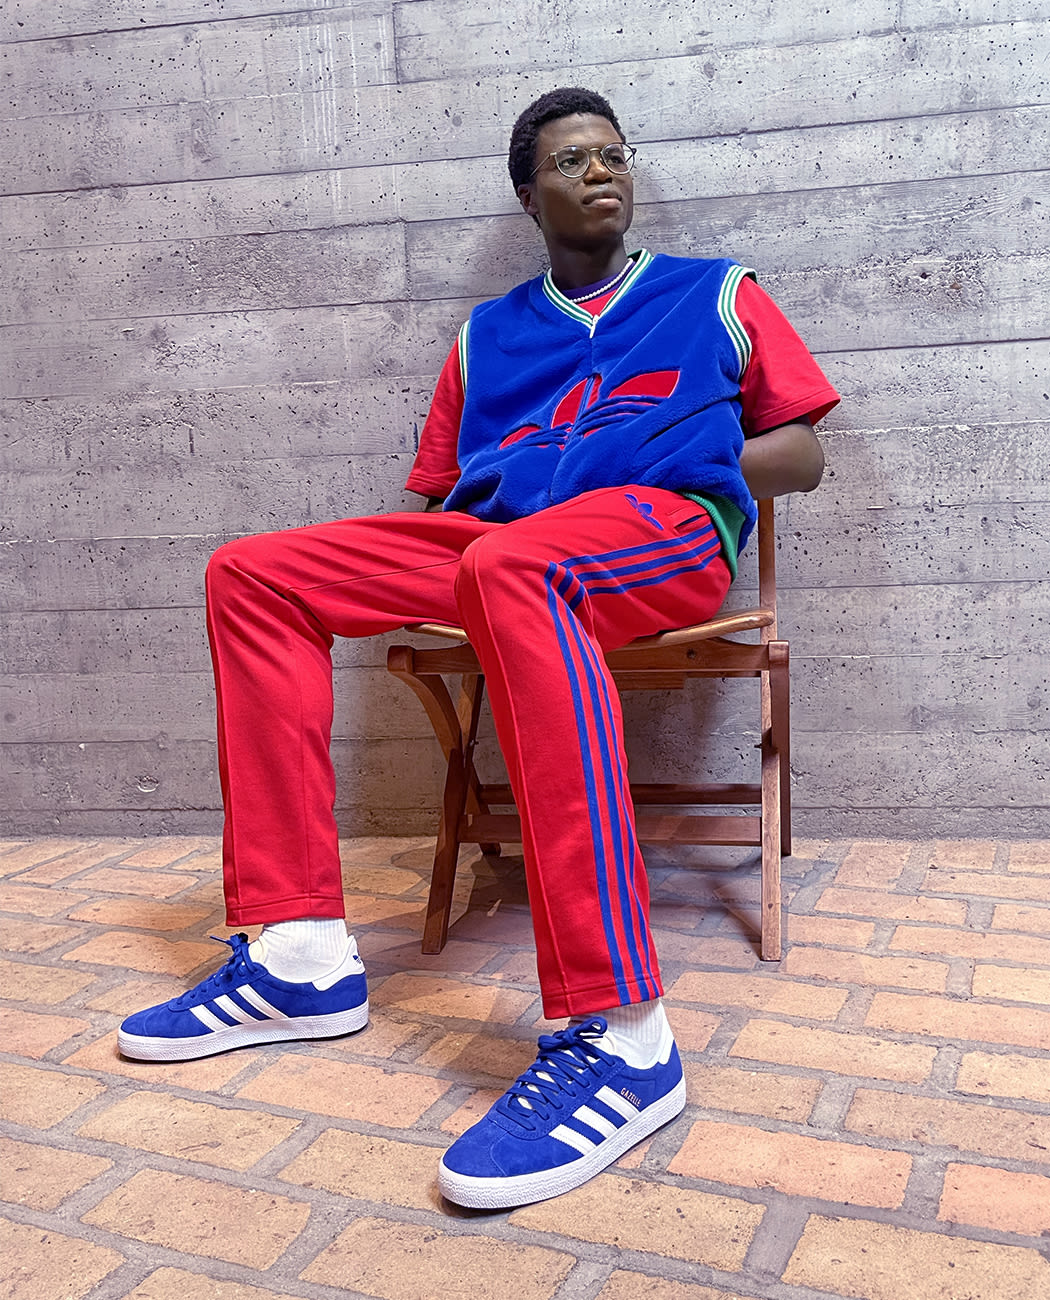 A male model sitting on a chair against a concrete wall, wearing red pants, a blue adidas vest and lightblue adidas Gazelle sneakers with white stripes.